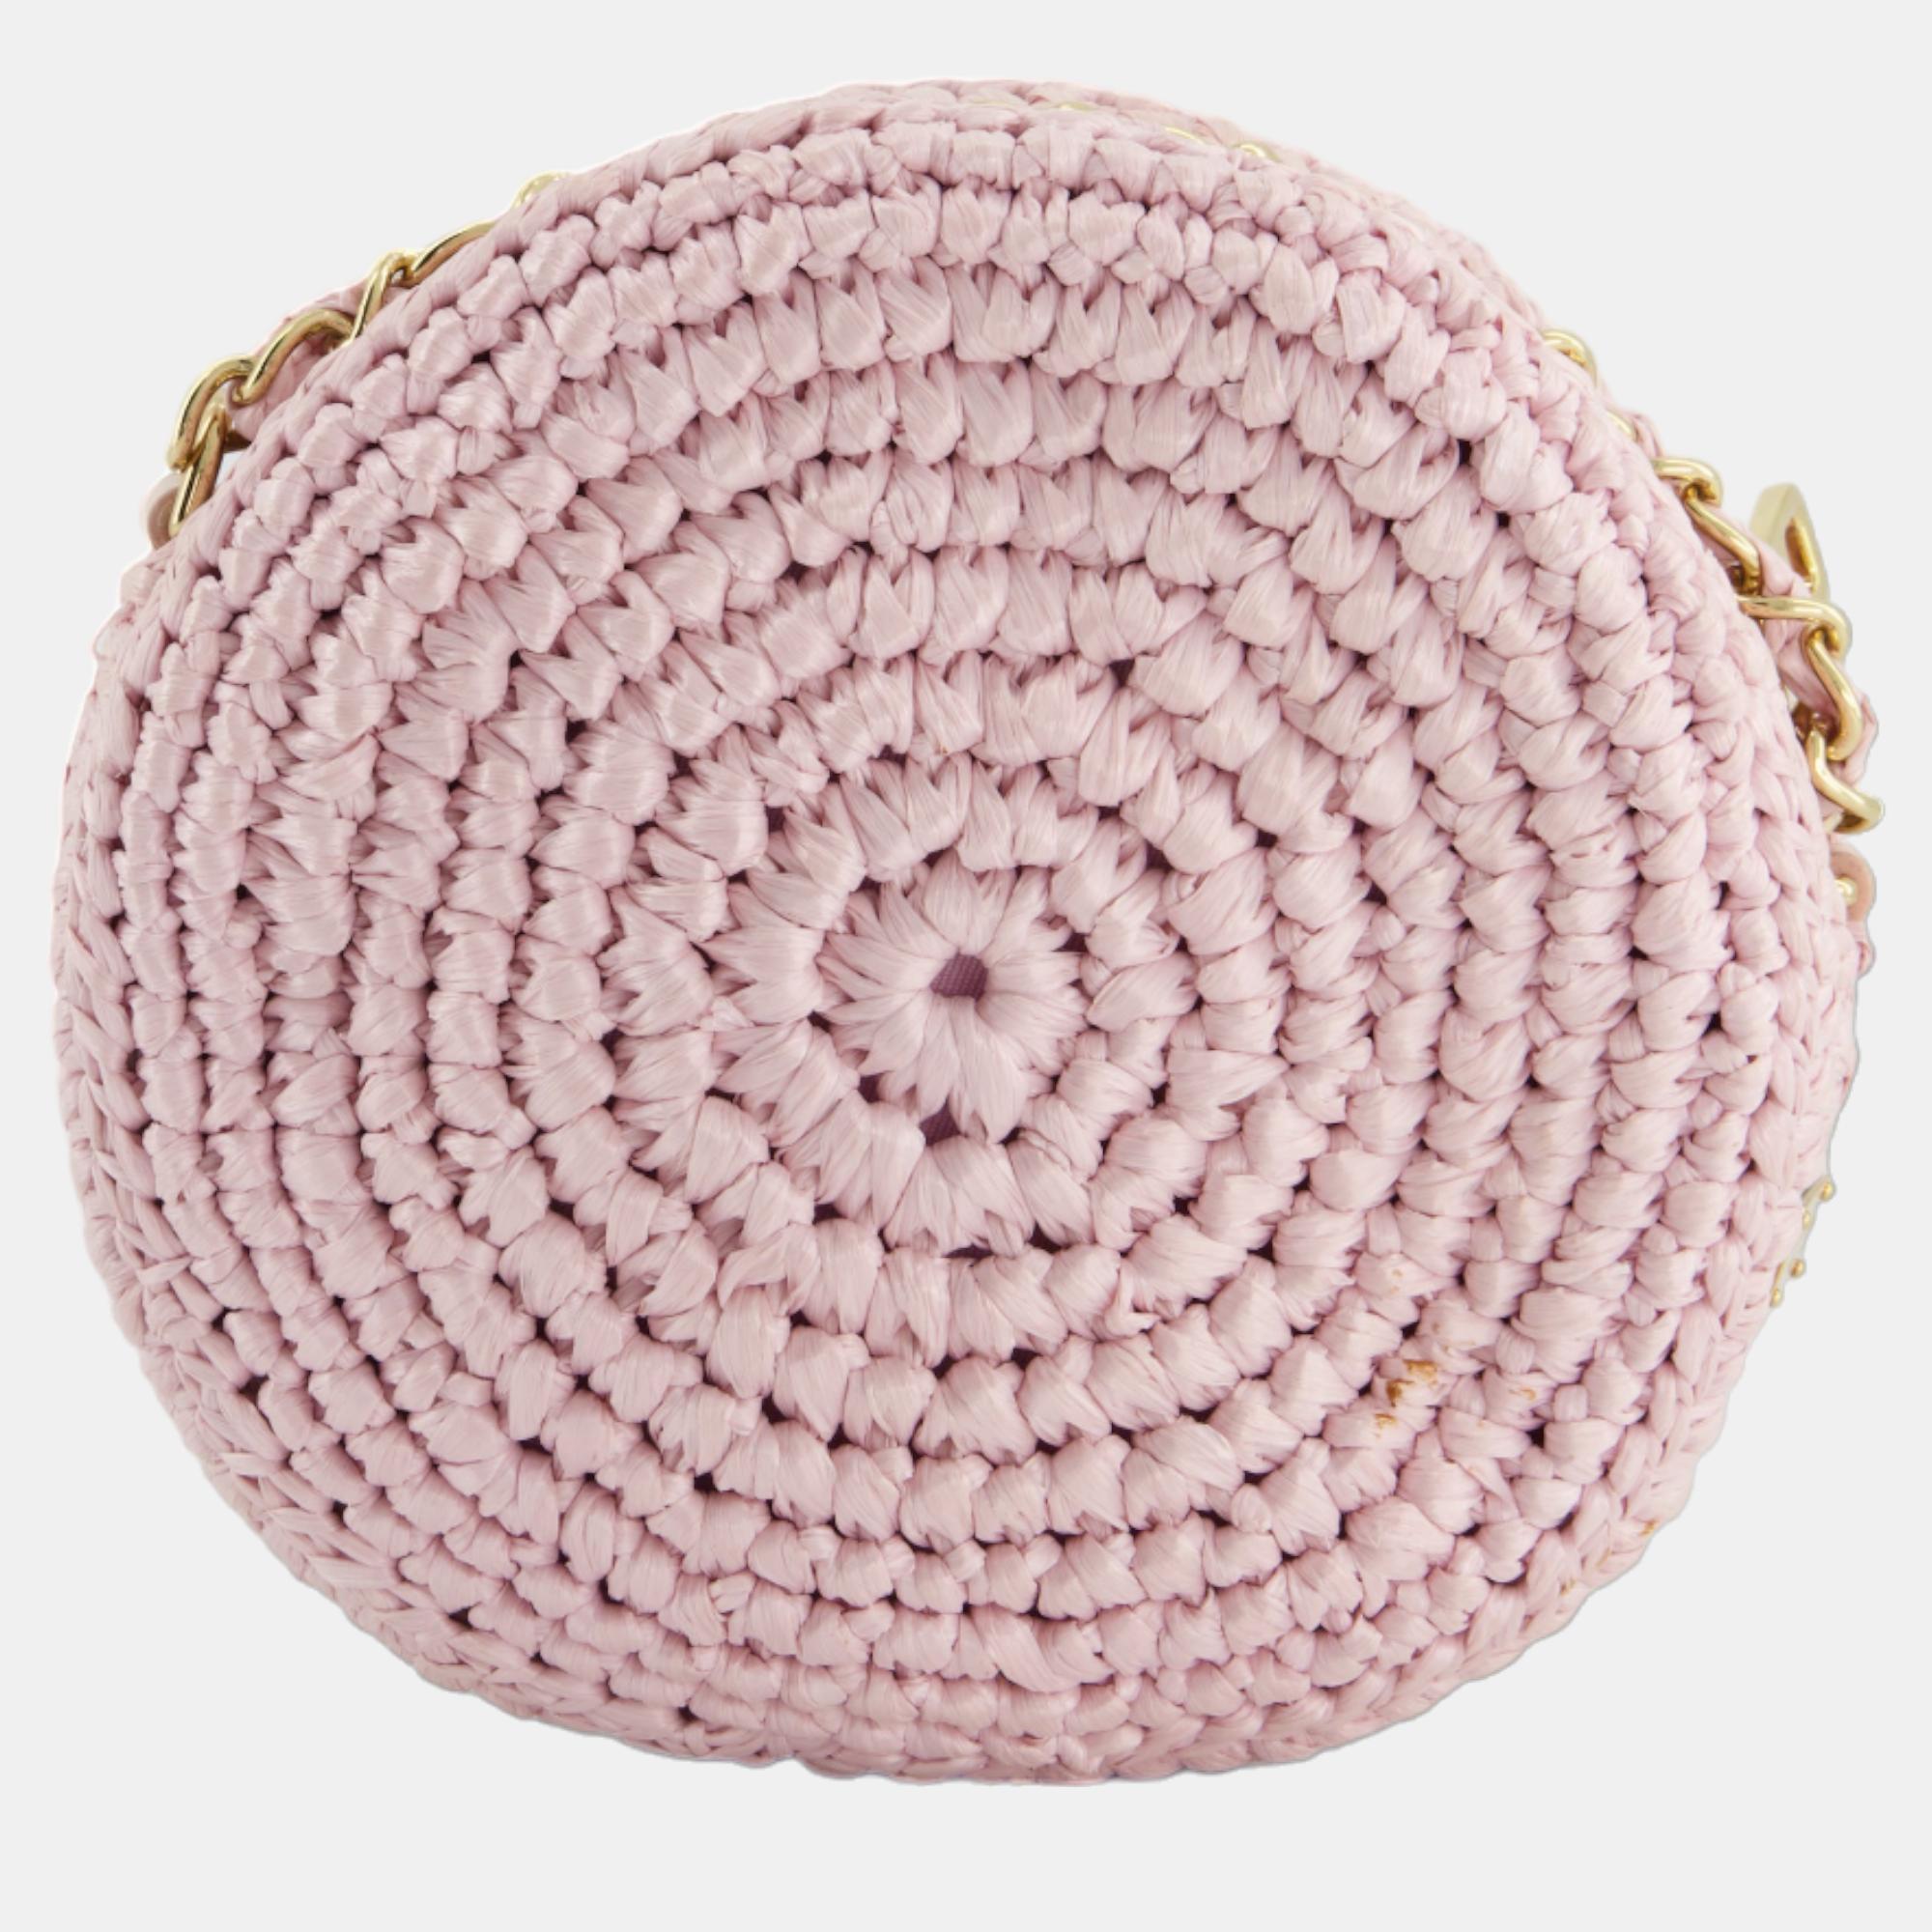 Dolce & Gabbana Pink Woven Round Crossbody Bag With Multicolour Crystal Flower Details With Gold Hardware